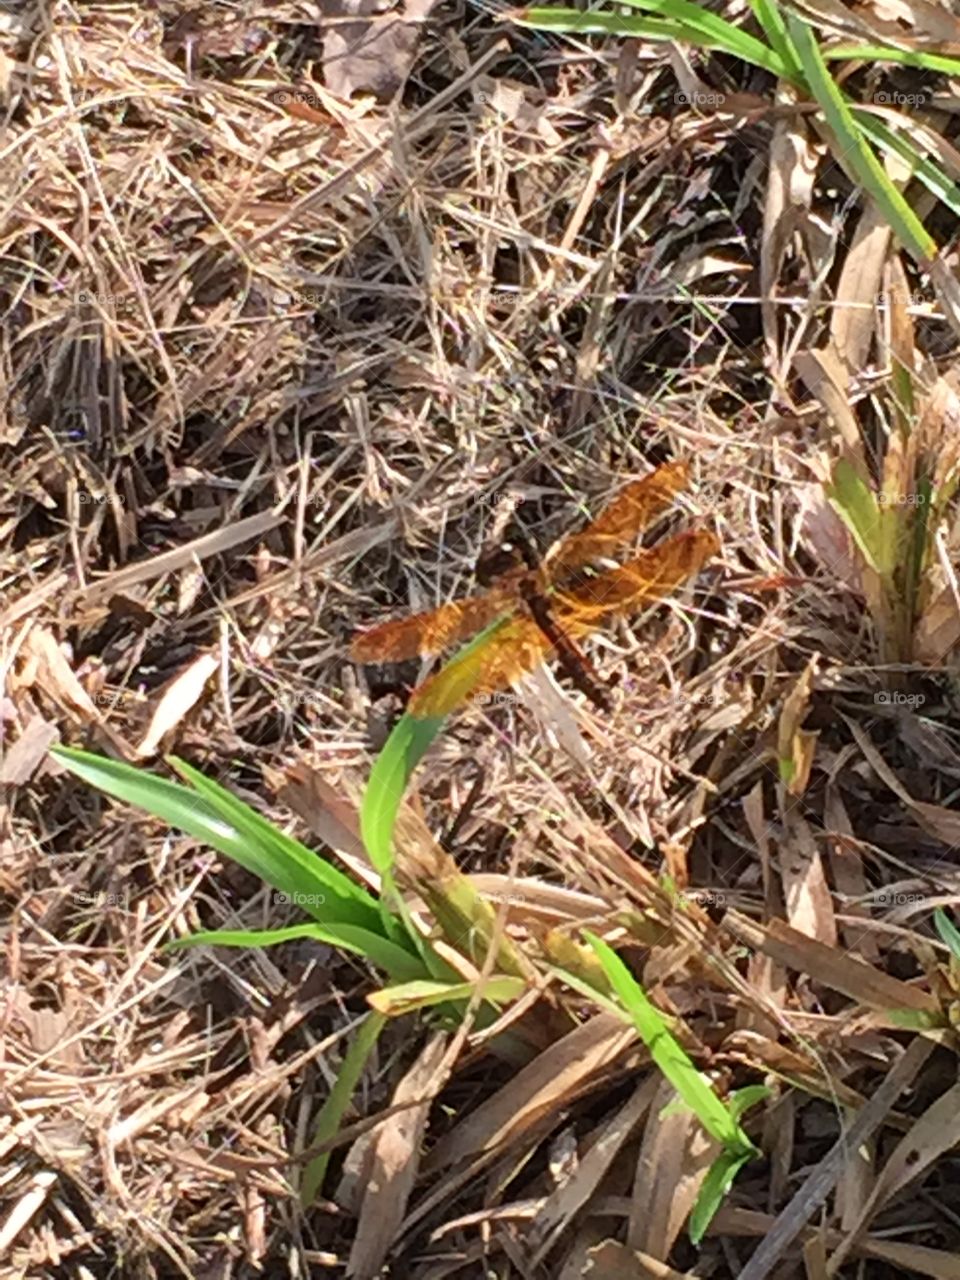 Amber dragonfly. My back yard. Tiniest dragonfly I've ever seen. Translucent Amber colored wings. 